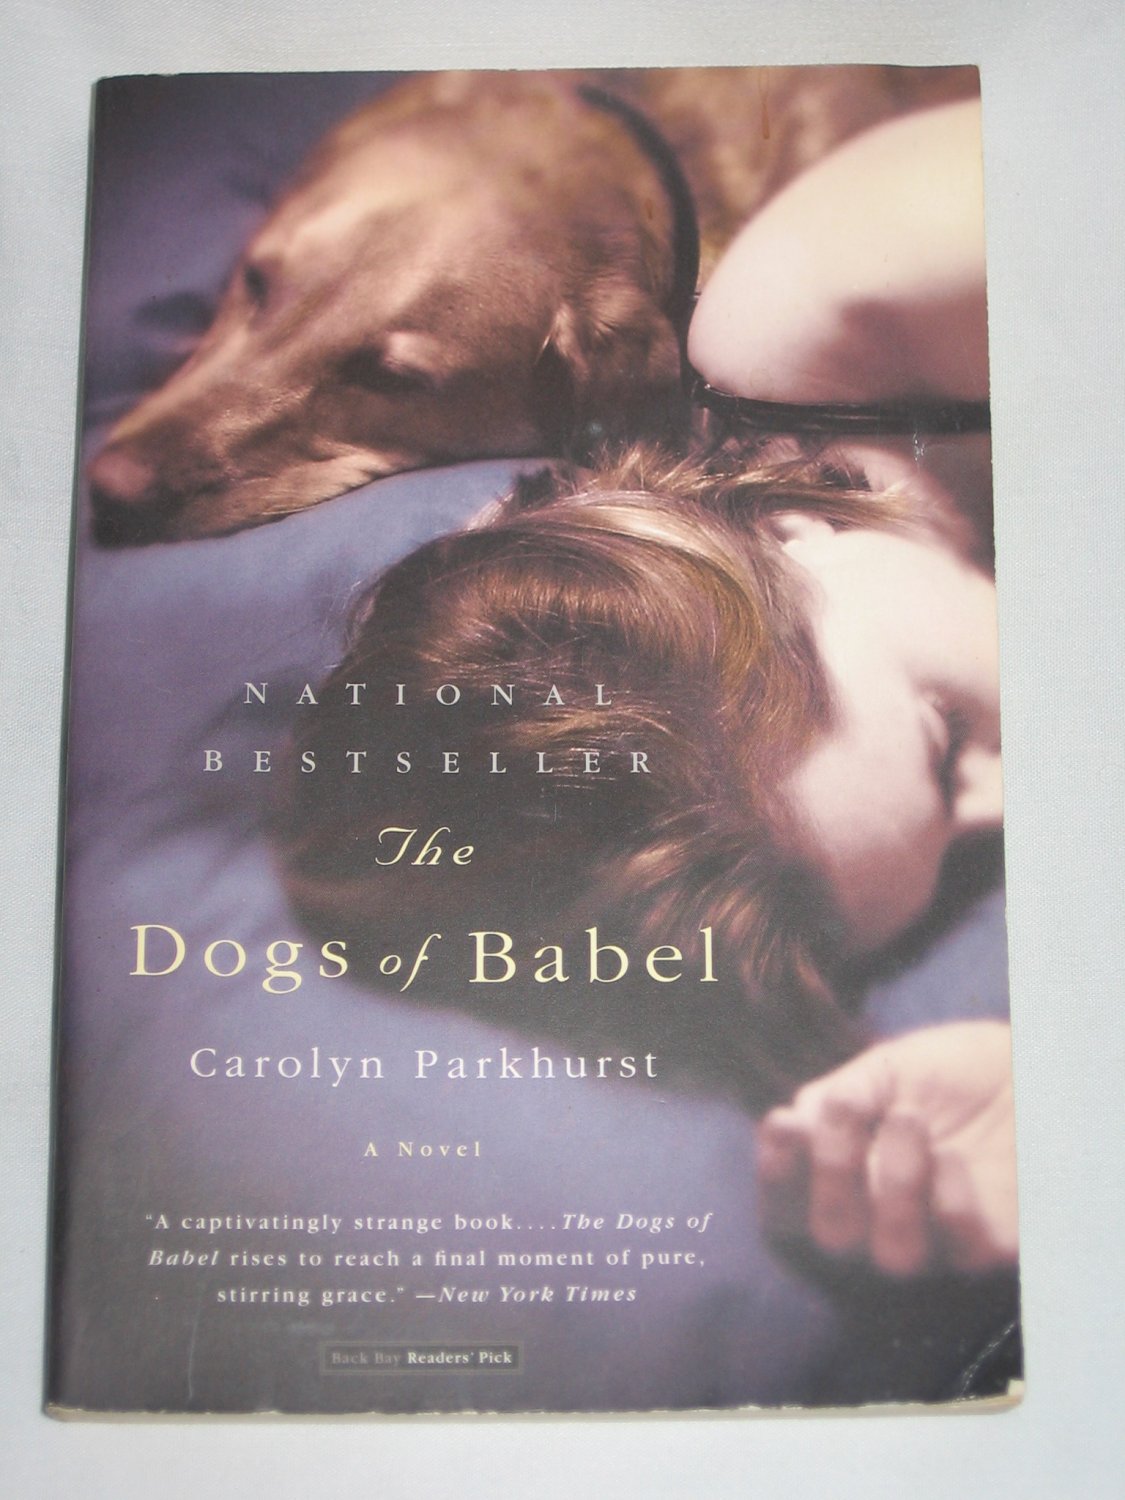 the dogs of babel by carolyn parkhurst